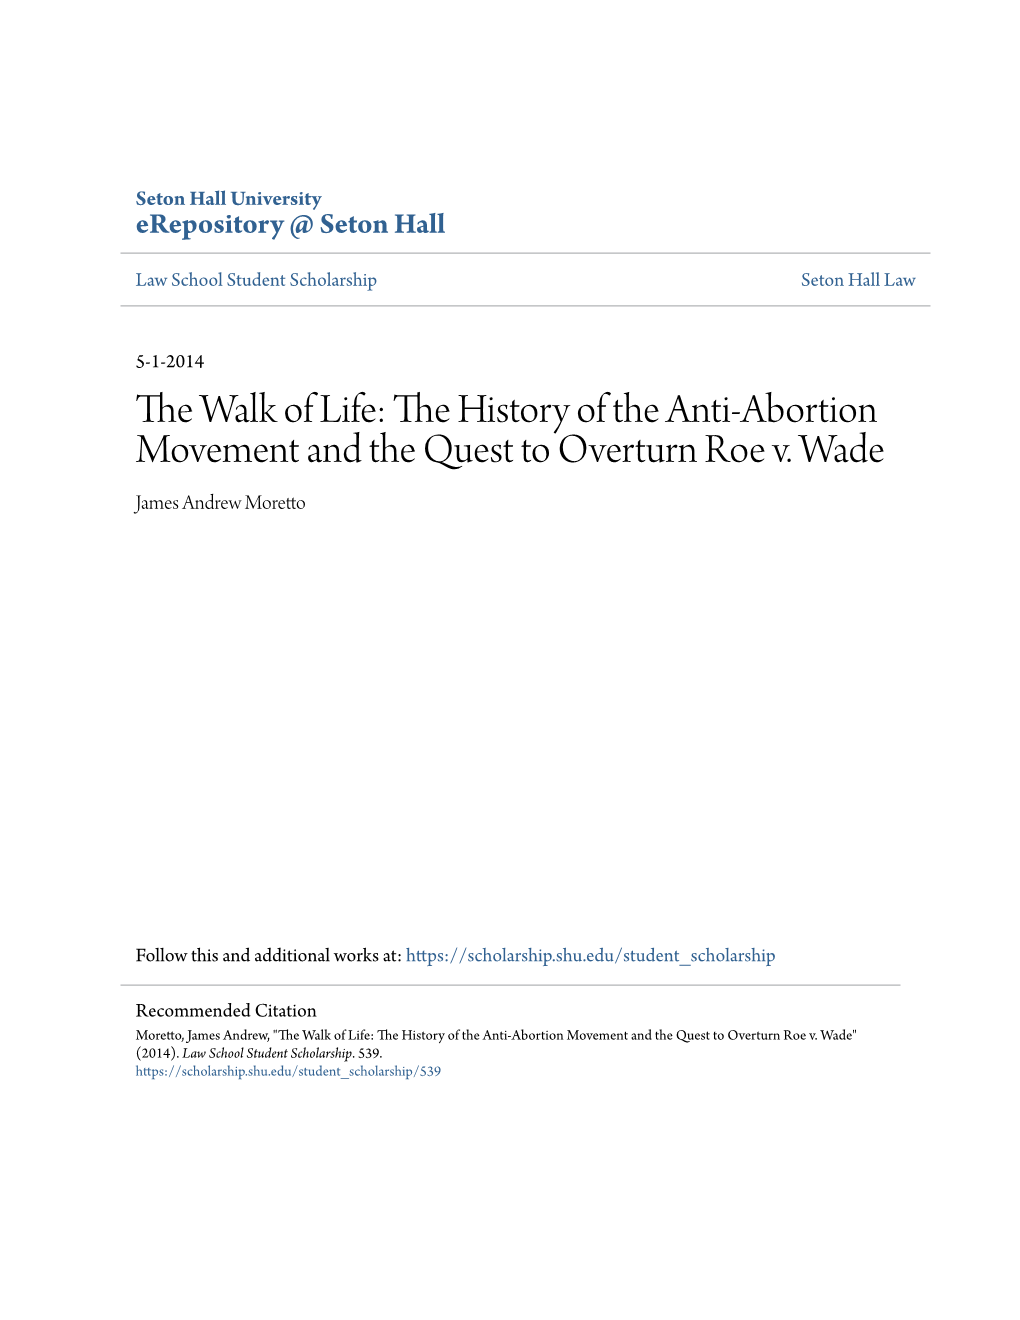 The History of the Anti-Abortion Movement and the Quest to Overturn